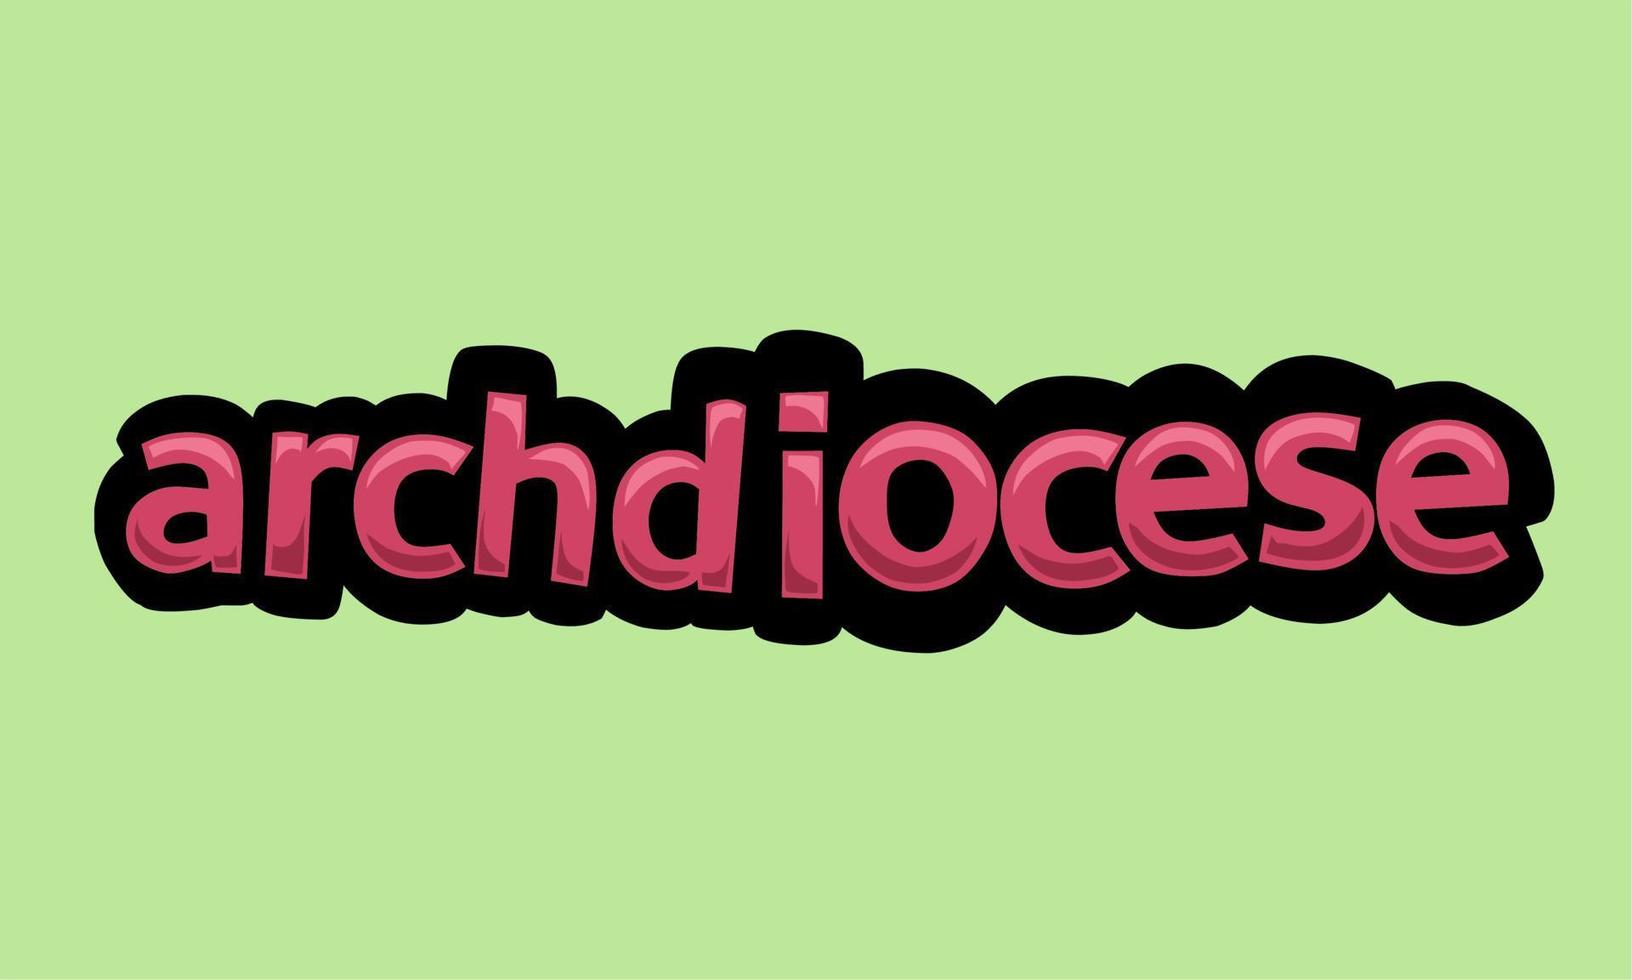 ARCHDIOCESE writing vector design on a green background